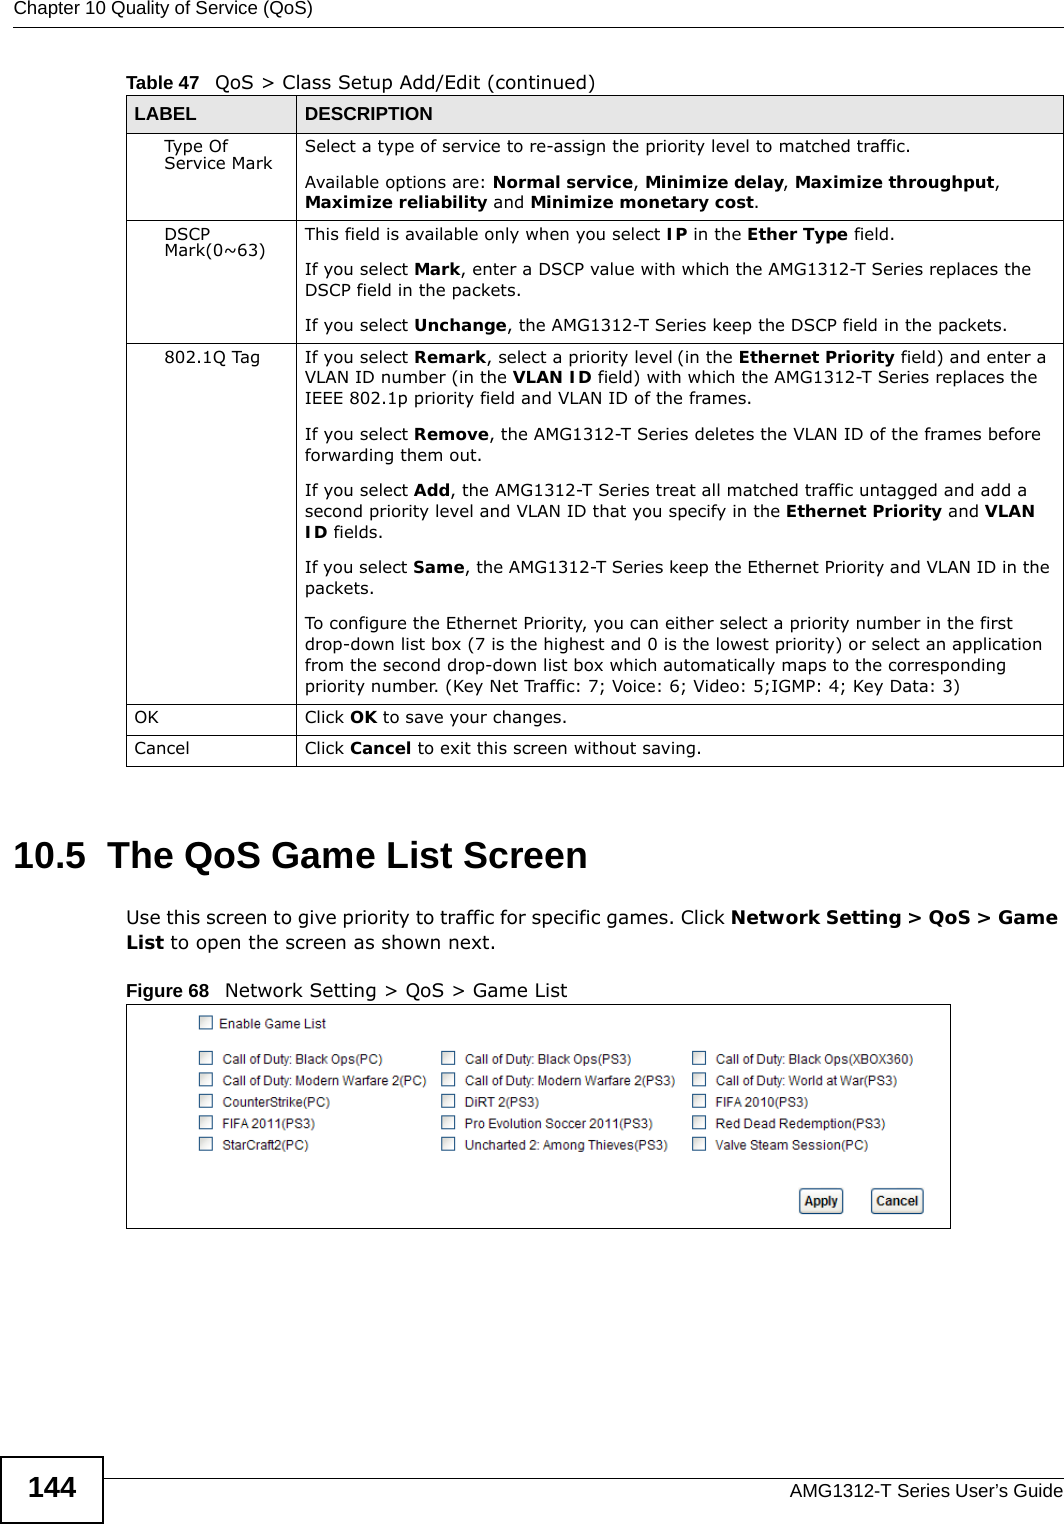 Chapter 10 Quality of Service (QoS)AMG1312-T Series User’s Guide14410.5  The QoS Game List Screen Use this screen to give priority to traffic for specific games. Click Network Setting &gt; QoS &gt; Game List to open the screen as shown next.Figure 68   Network Setting &gt; QoS &gt; Game ListType Of Service Mark Select a type of service to re-assign the priority level to matched traffic.Available options are: Normal service, Minimize delay, Maximize throughput, Maximize reliability and Minimize monetary cost.DSCP Mark(0~63) This field is available only when you select IP in the Ether Type field.If you select Mark, enter a DSCP value with which the AMG1312-T Series replaces the DSCP field in the packets.If you select Unchange, the AMG1312-T Series keep the DSCP field in the packets.802.1Q Tag If you select Remark, select a priority level (in the Ethernet Priority field) and enter a VLAN ID number (in the VLAN ID field) with which the AMG1312-T Series replaces the IEEE 802.1p priority field and VLAN ID of the frames.If you select Remove, the AMG1312-T Series deletes the VLAN ID of the frames before forwarding them out.If you select Add, the AMG1312-T Series treat all matched traffic untagged and add a second priority level and VLAN ID that you specify in the Ethernet Priority and VLAN ID fields.If you select Same, the AMG1312-T Series keep the Ethernet Priority and VLAN ID in the packets.To configure the Ethernet Priority, you can either select a priority number in the first drop-down list box (7 is the highest and 0 is the lowest priority) or select an application from the second drop-down list box which automatically maps to the corresponding priority number. (Key Net Traffic: 7; Voice: 6; Video: 5;IGMP: 4; Key Data: 3)OK Click OK to save your changes.Cancel Click Cancel to exit this screen without saving.Table 47   QoS &gt; Class Setup Add/Edit (continued)LABEL DESCRIPTION